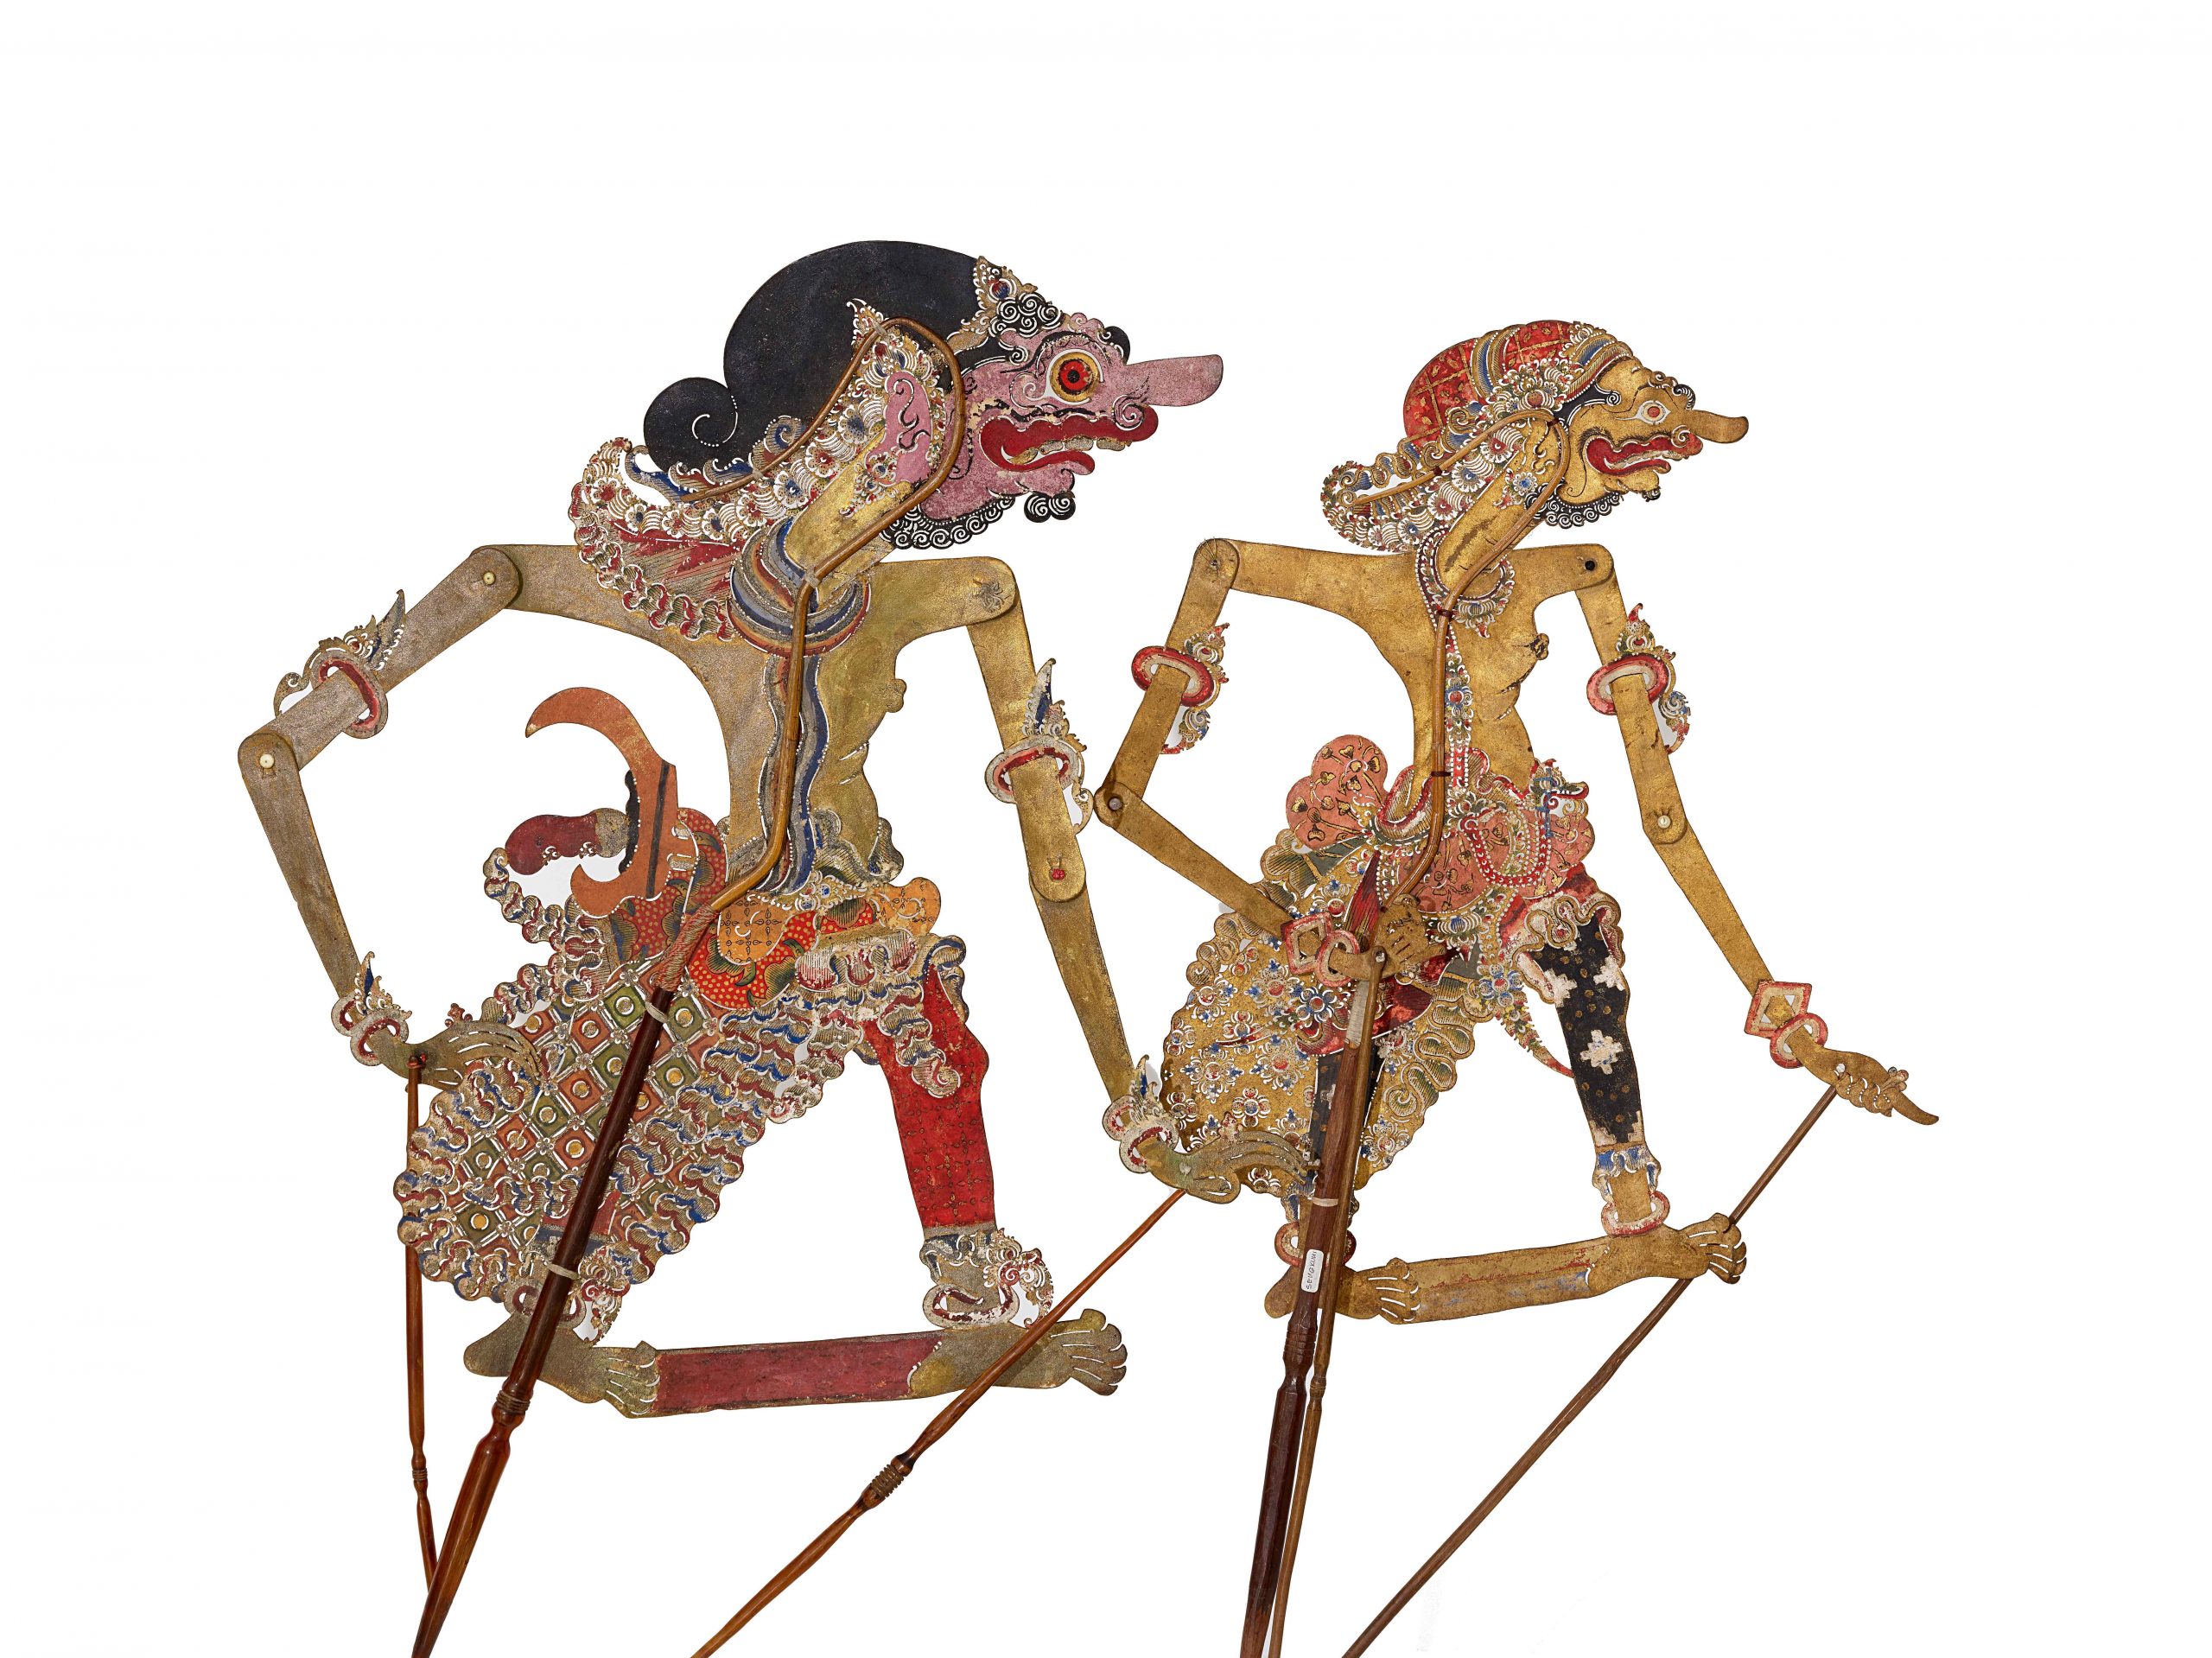  The image shows two Javanese wayang kulit shadow puppets, with the one on the left being the haughty character Duryodana.